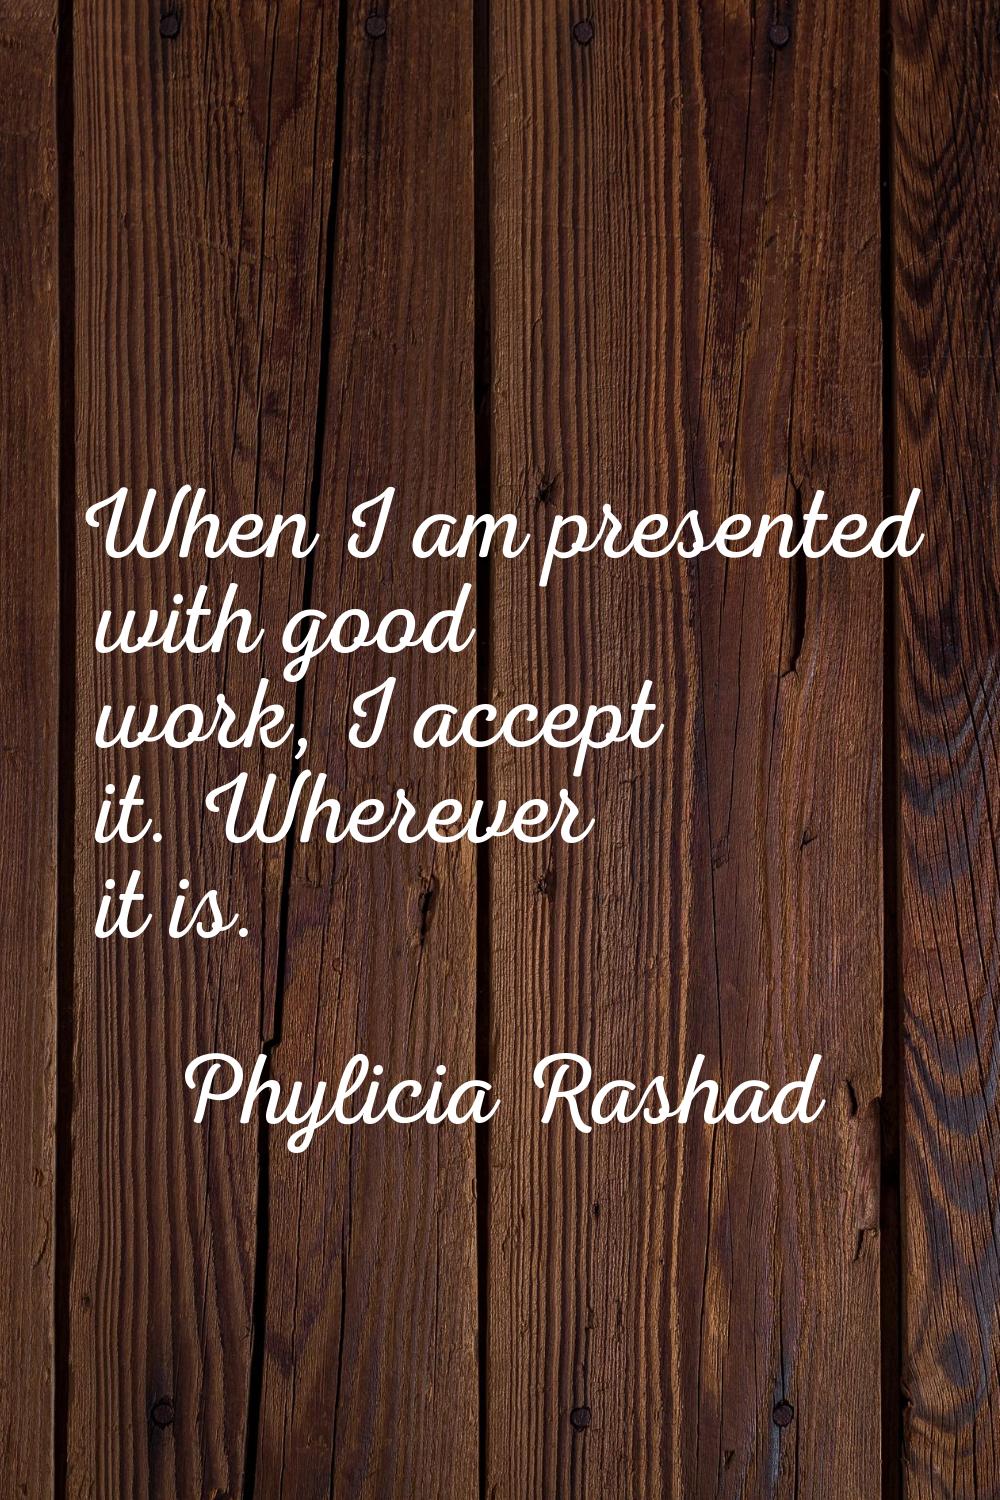 When I am presented with good work, I accept it. Wherever it is.